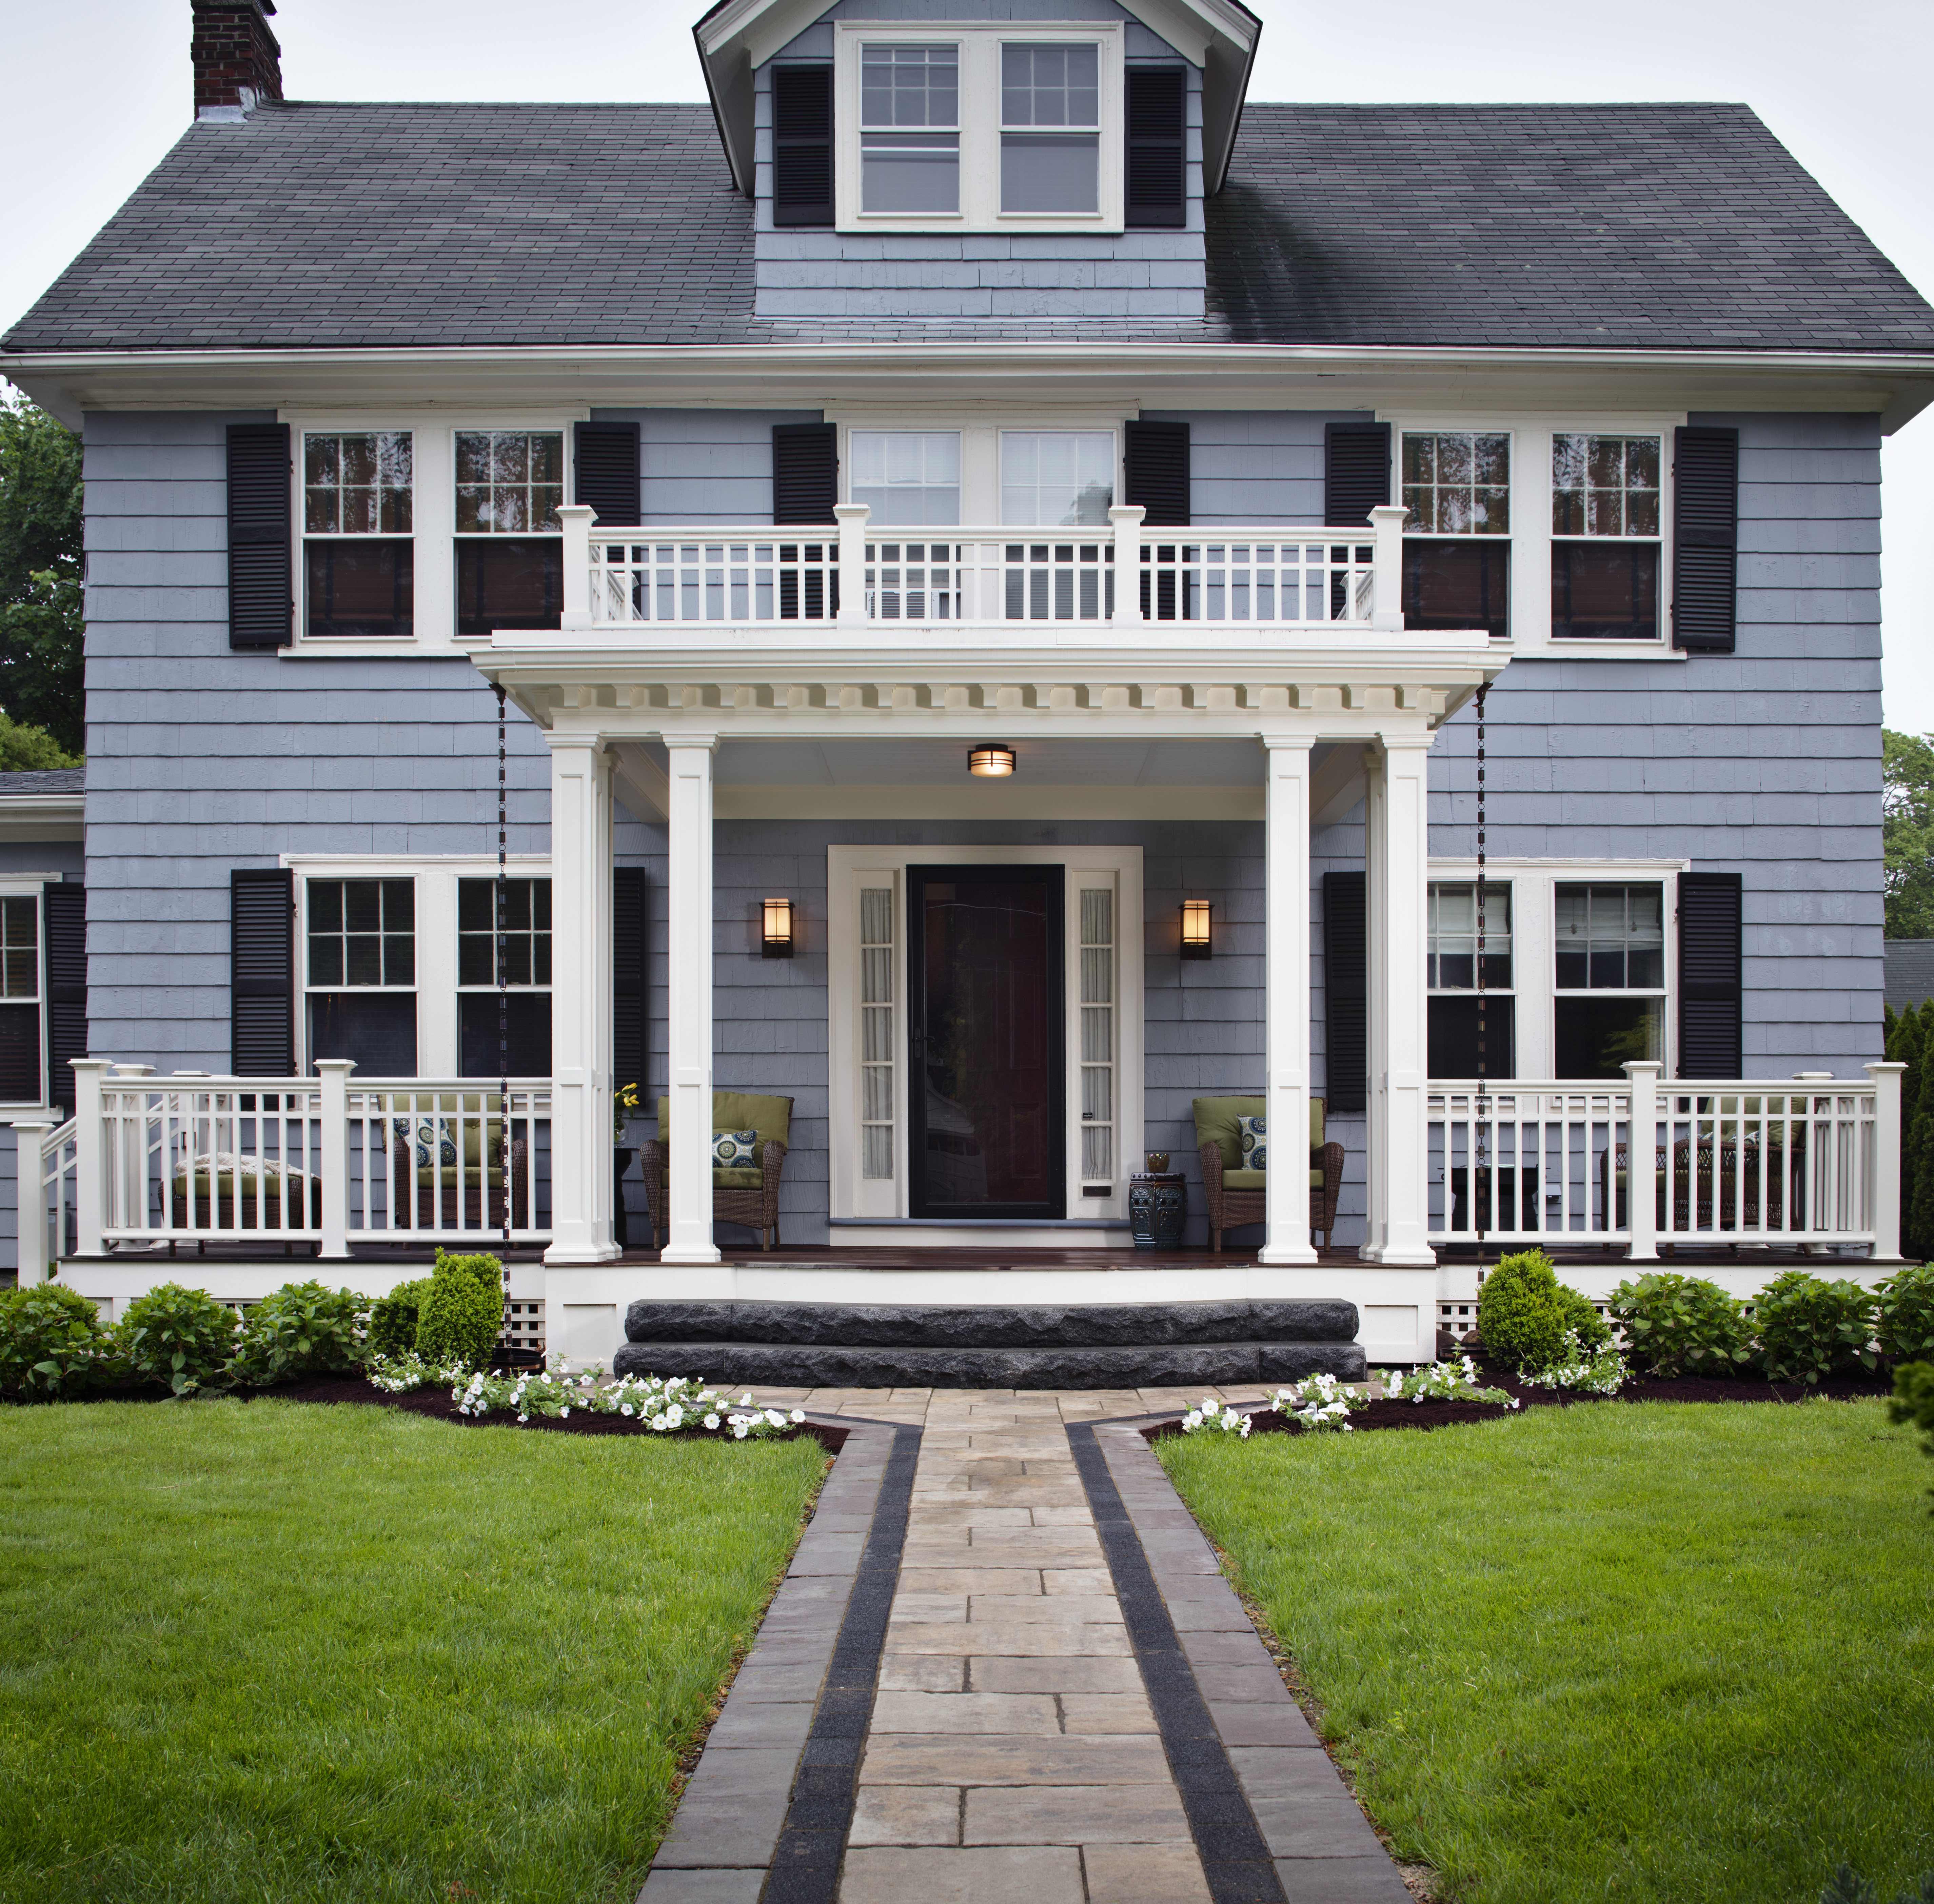 Open Porches | Archadeck custom decks, patios, sunrooms, and porch ...